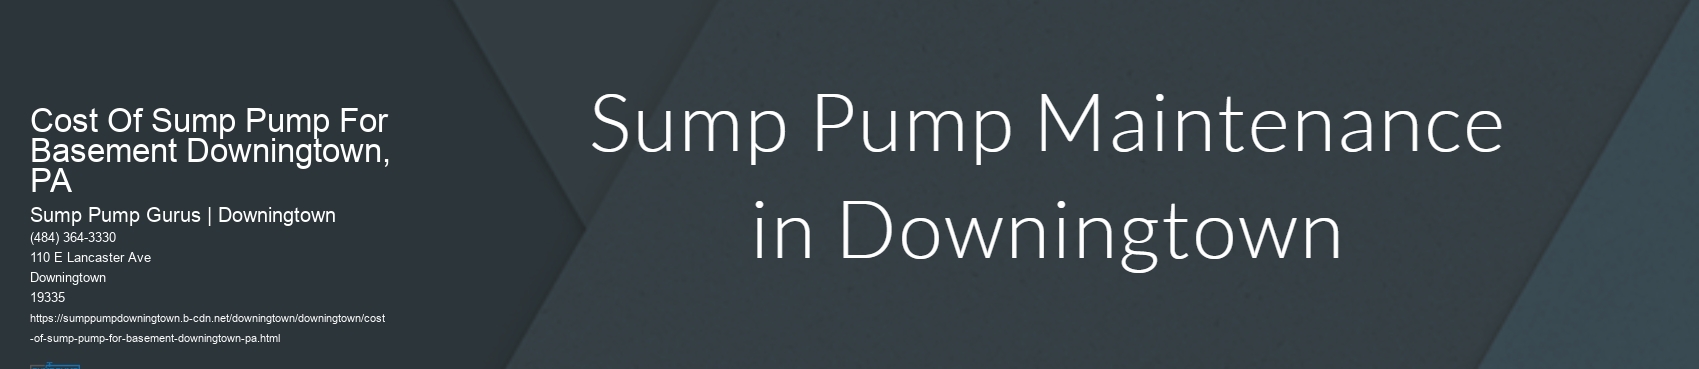 Cost Of Sump Pump For Basement Downingtown, PA